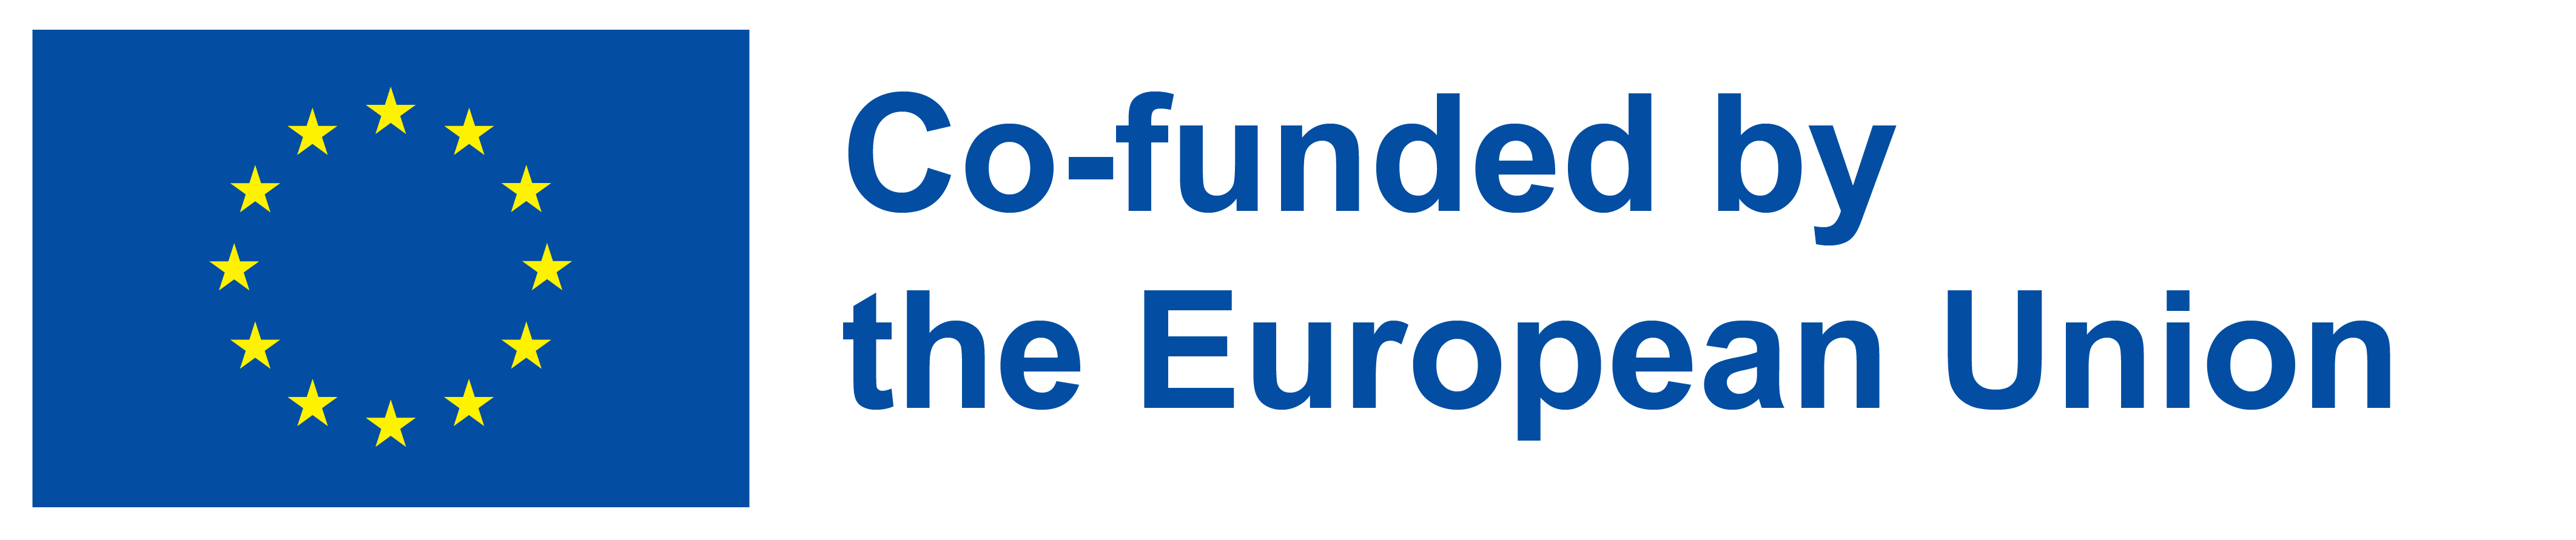 Co-funded by the European Union, logo